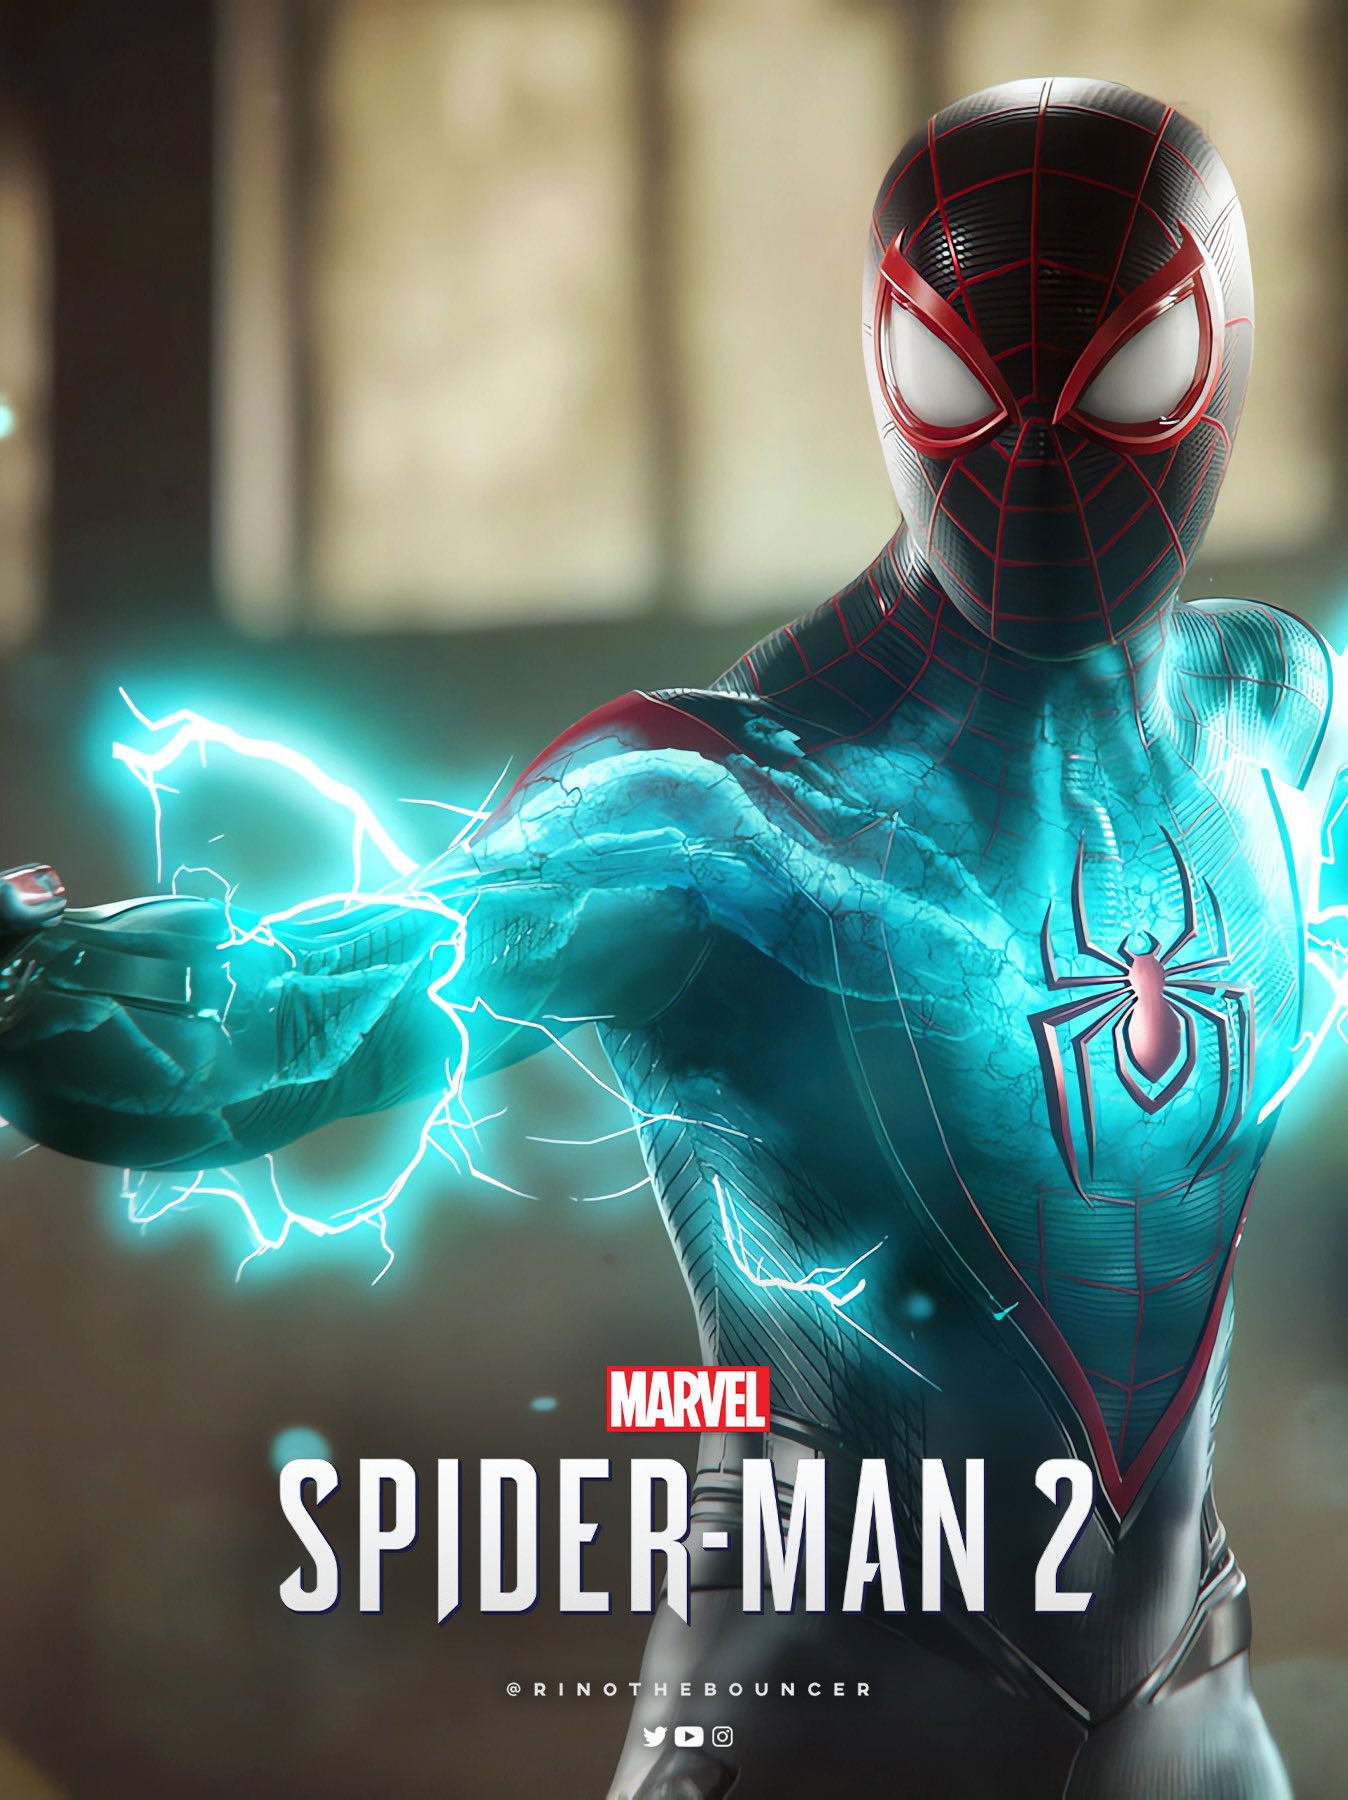 Rino on X: Marvel's Spider-Man 2 is gonna be a benchmark #PS5